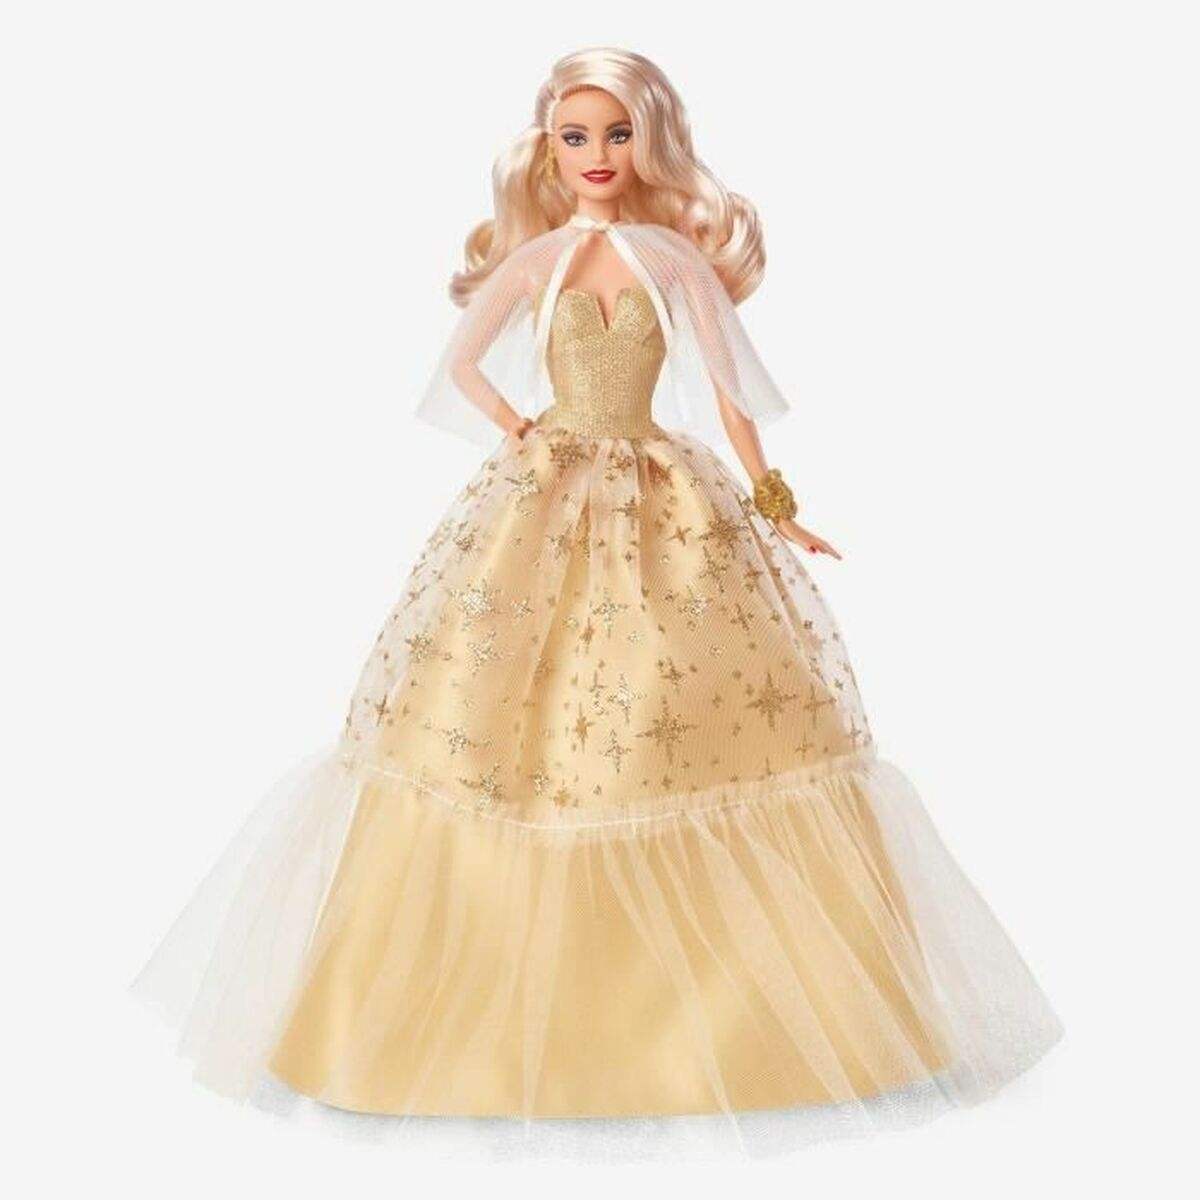 Baby-Puppe Barbie Holiday Barbie 35 th Anniversary